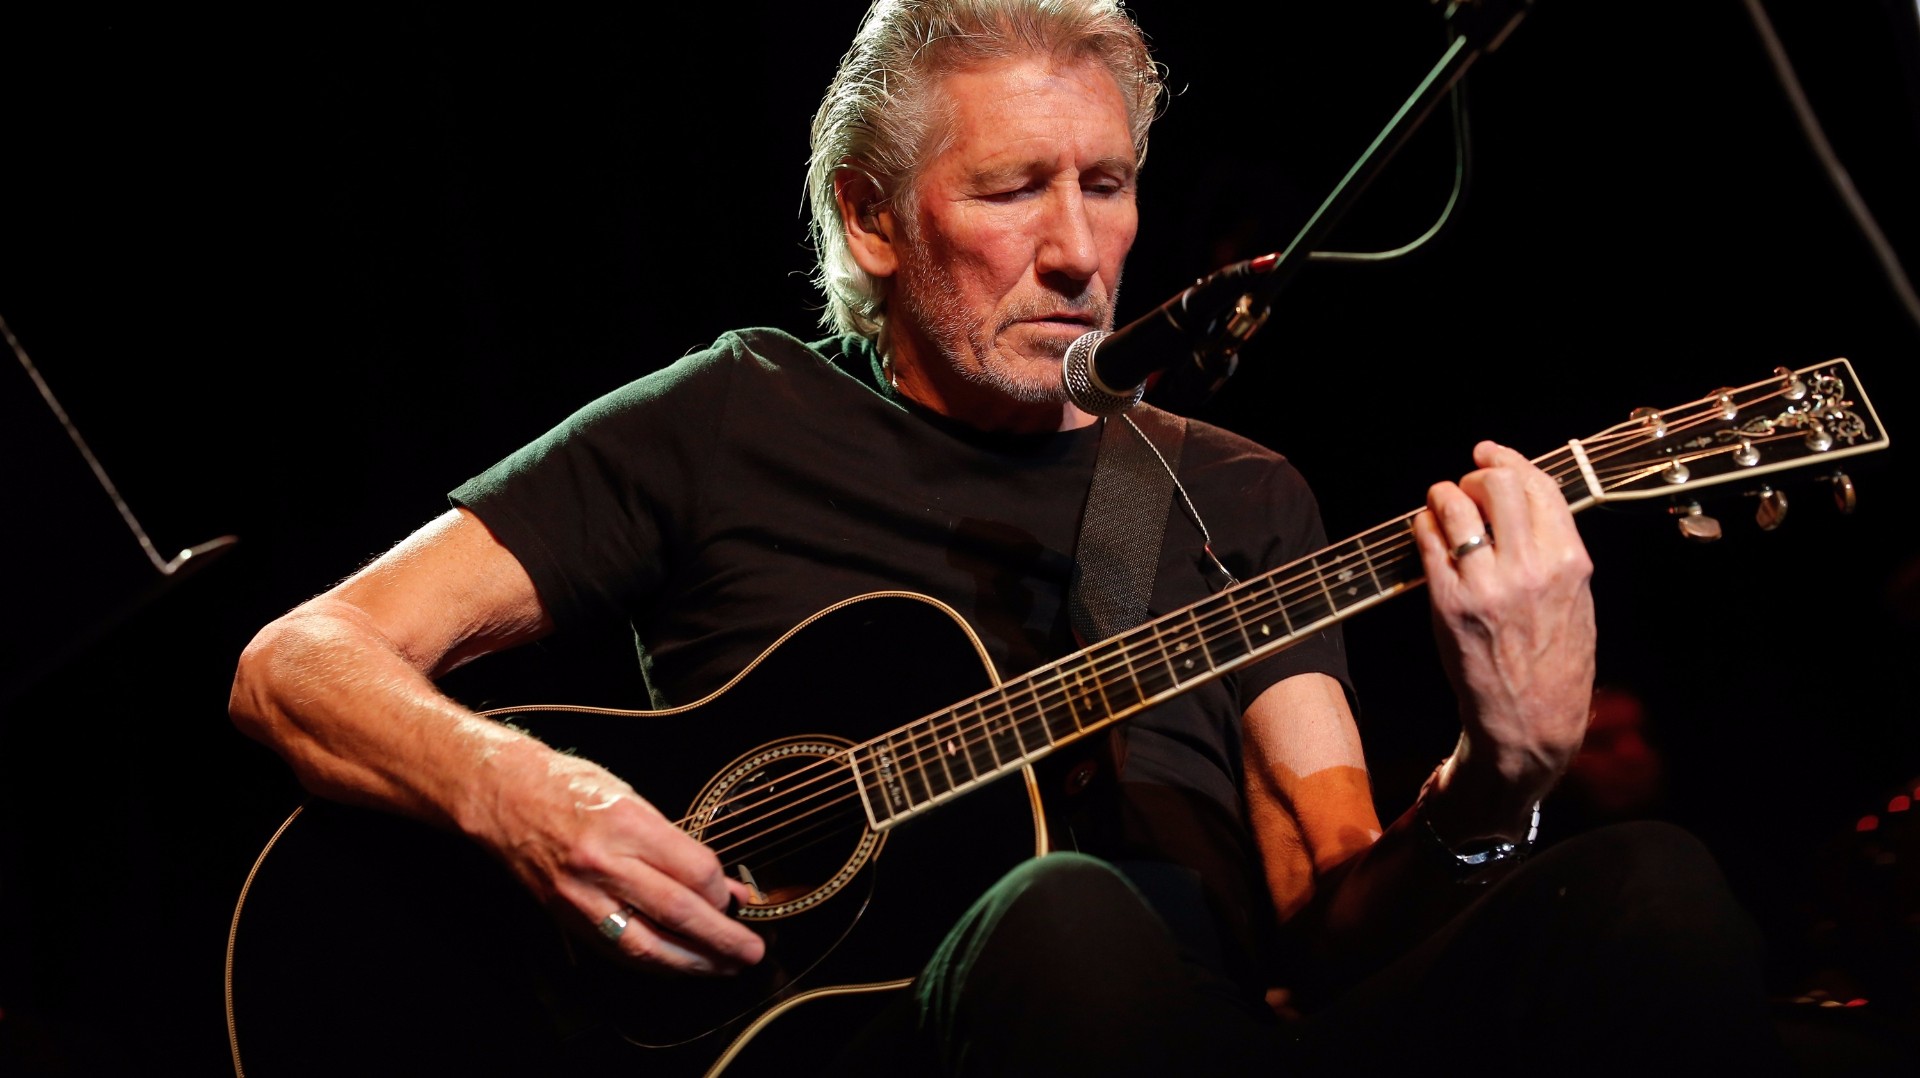 roger waters - photo #47